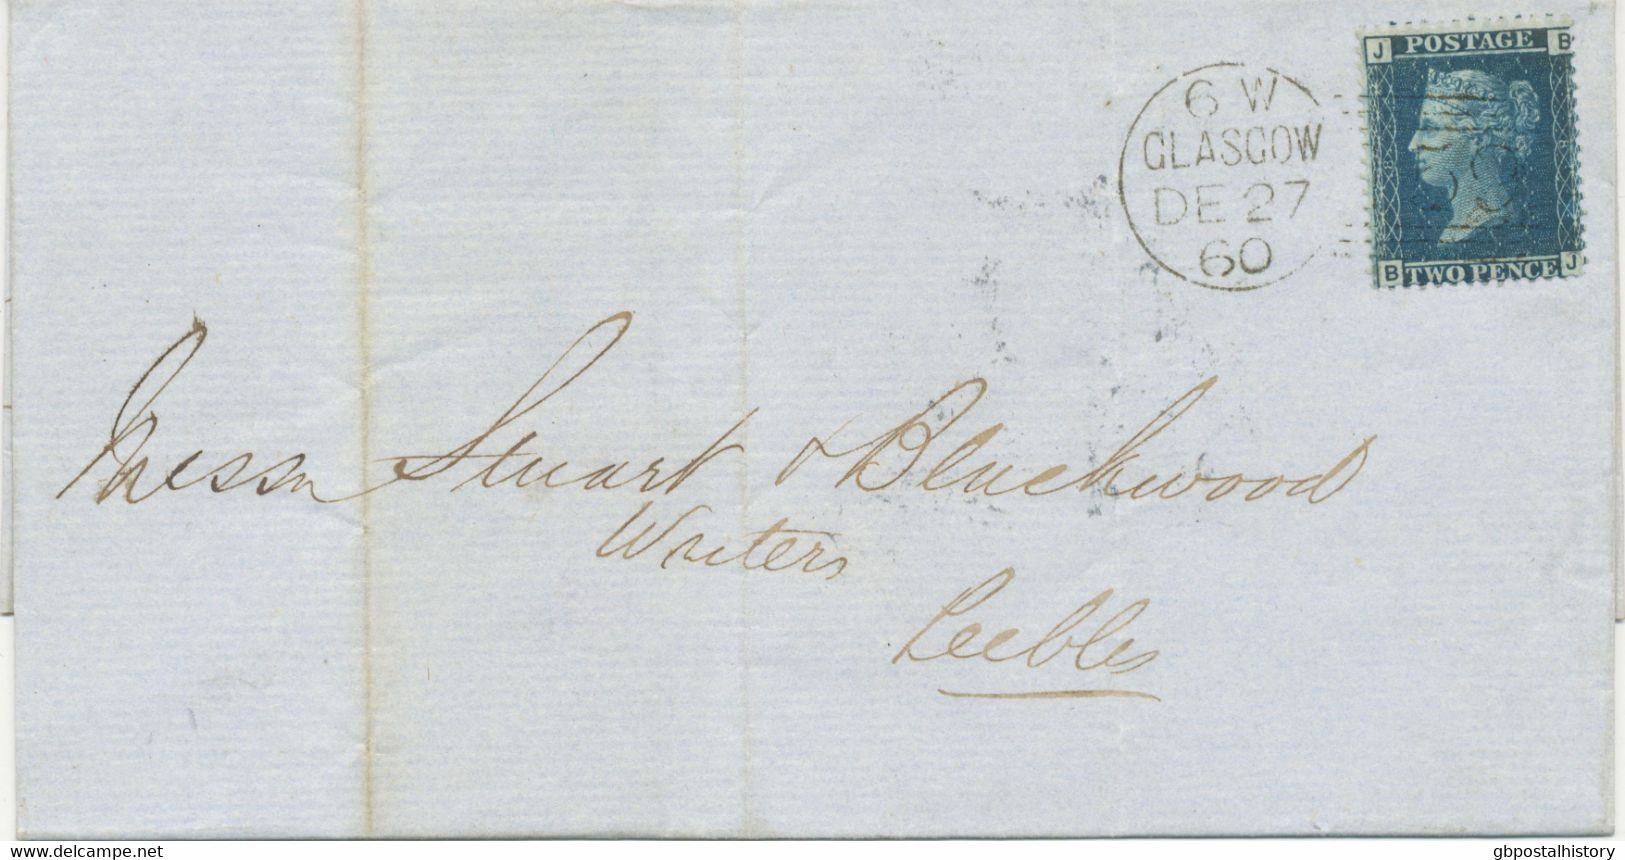 GB „159 / GLASGOW“ Scottish Duplex (6 THIN Bars With Different Length, Time Code „6 W“, Datepart 20mm) On Superb Cover - Lettres & Documents